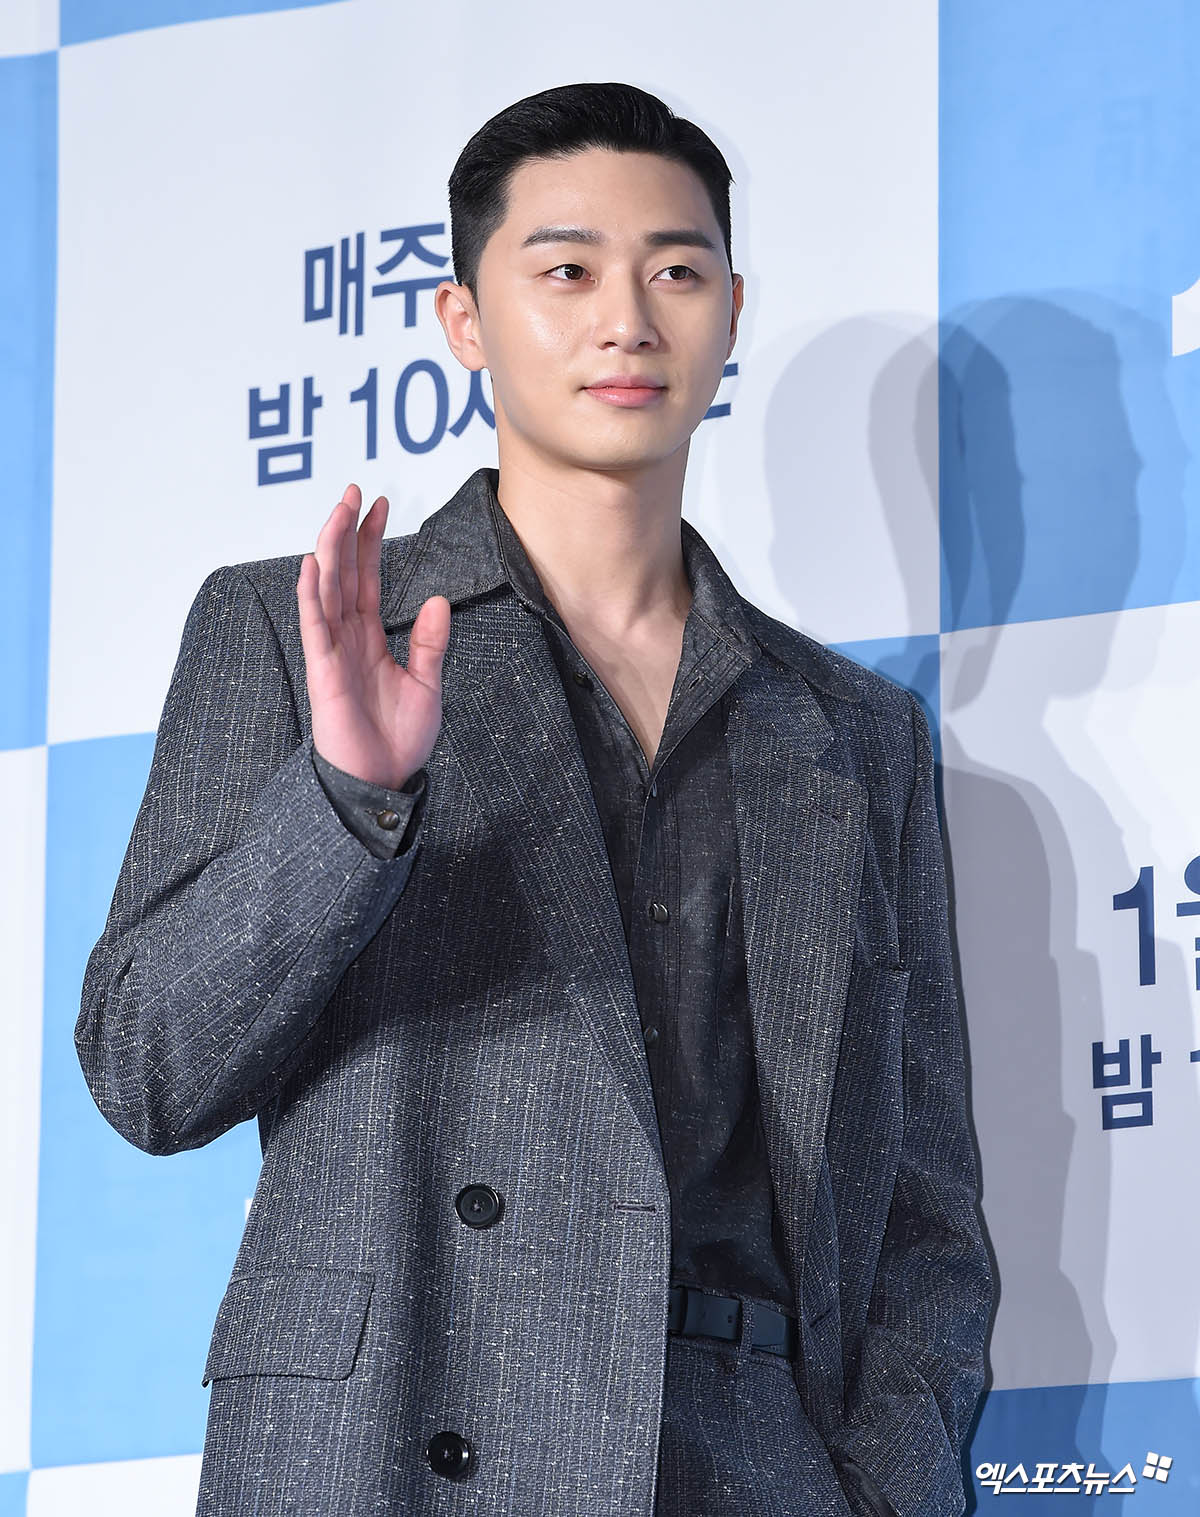 Actor Park Seo-joon, who attended the JTBC gilt drama Itaewon Klath production presentation held in Conrad Seoul, Yeouido-dong, Seoul, on the afternoon of the 20th, has photo time.